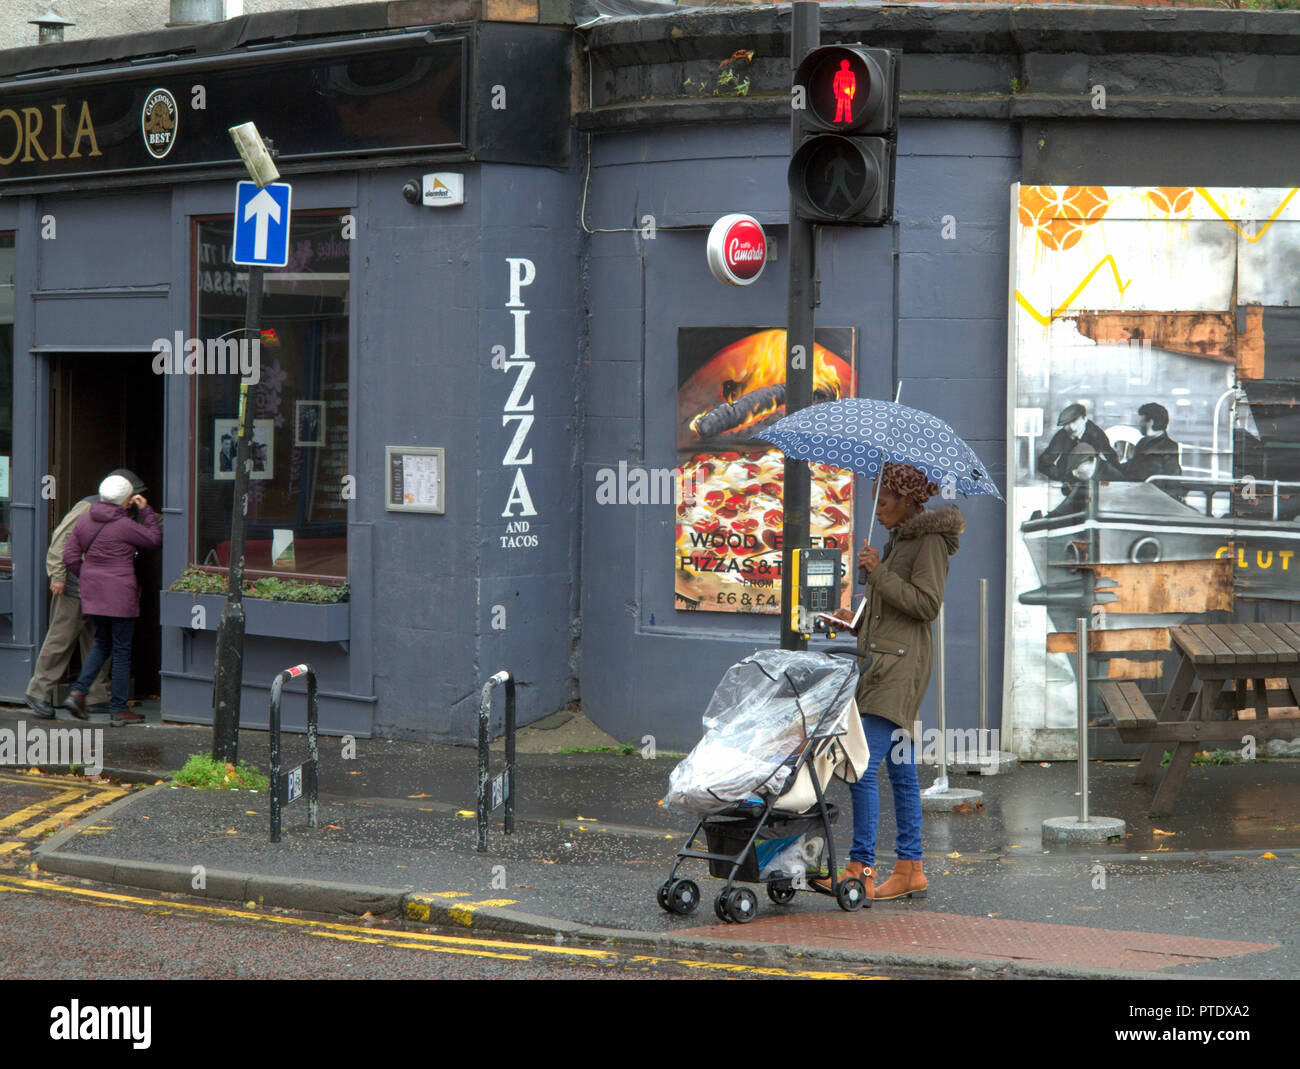 Glasgow, Scotland, UK, 9th October, 2018. UK Weather: Rain and wind over the last few days have taken their toll on the famous mural of the Clutha bar helicopter tragedy scene with parts of the Stan Laurel portrait suffering from the windy wet weather.The famous people depicted have a connection directly with the bar or city. Gerard Ferry/Alamy news Credit: gerard ferry/Alamy Live News Stock Photo